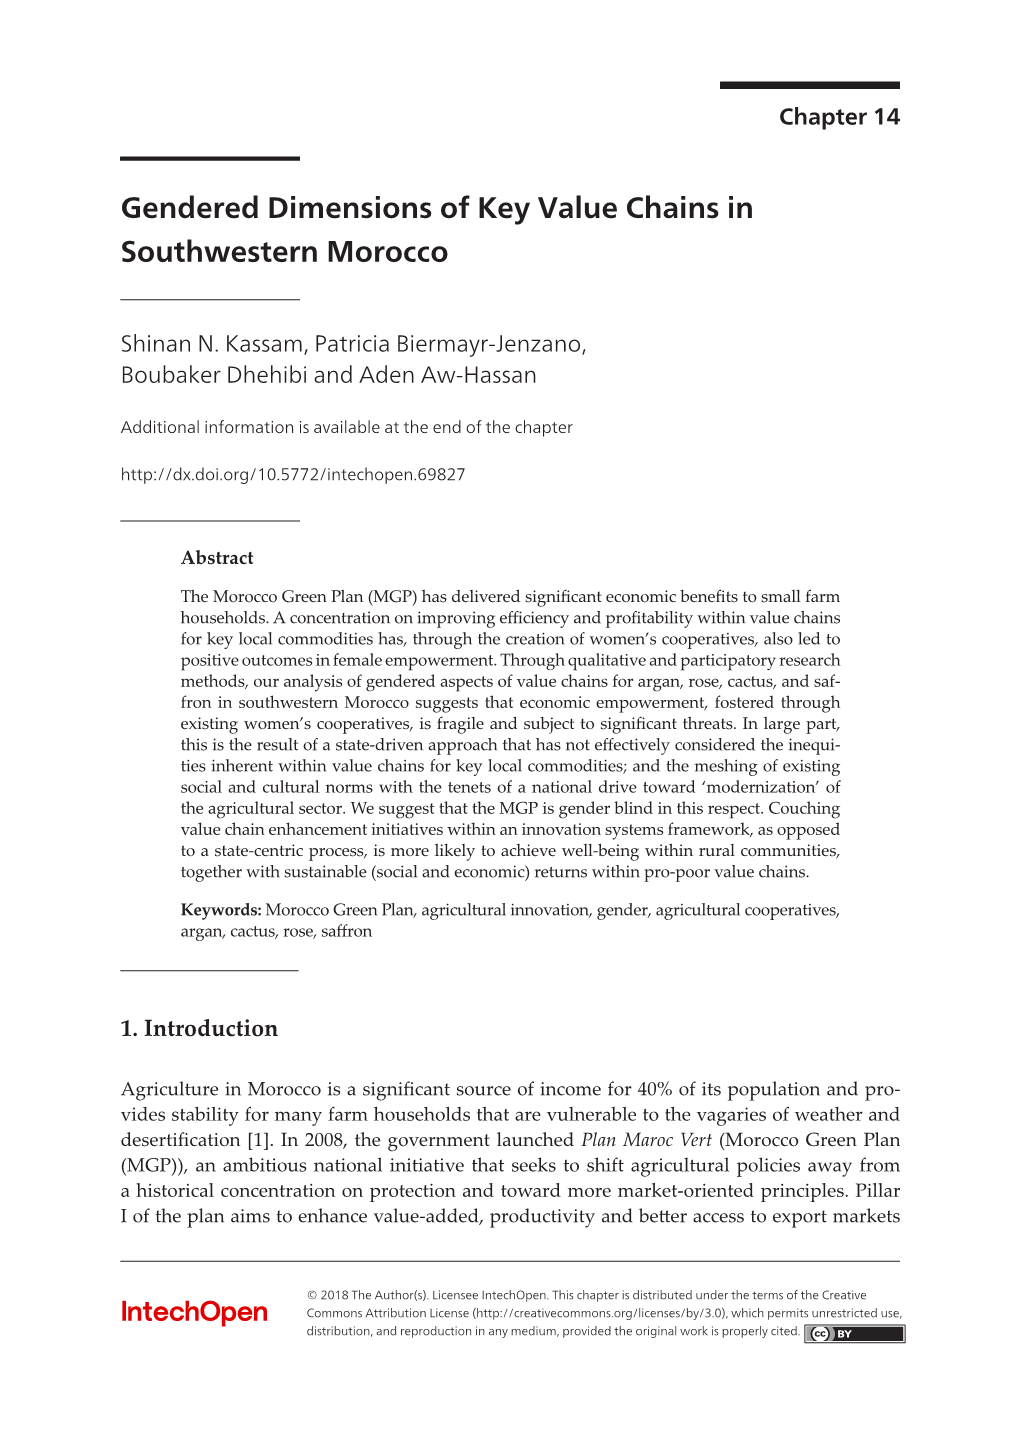 Gendered Dimensions of Key Value Chains in Southwesterngendered Dimensions Morocco of Key Value Chains in Southwestern Morocco